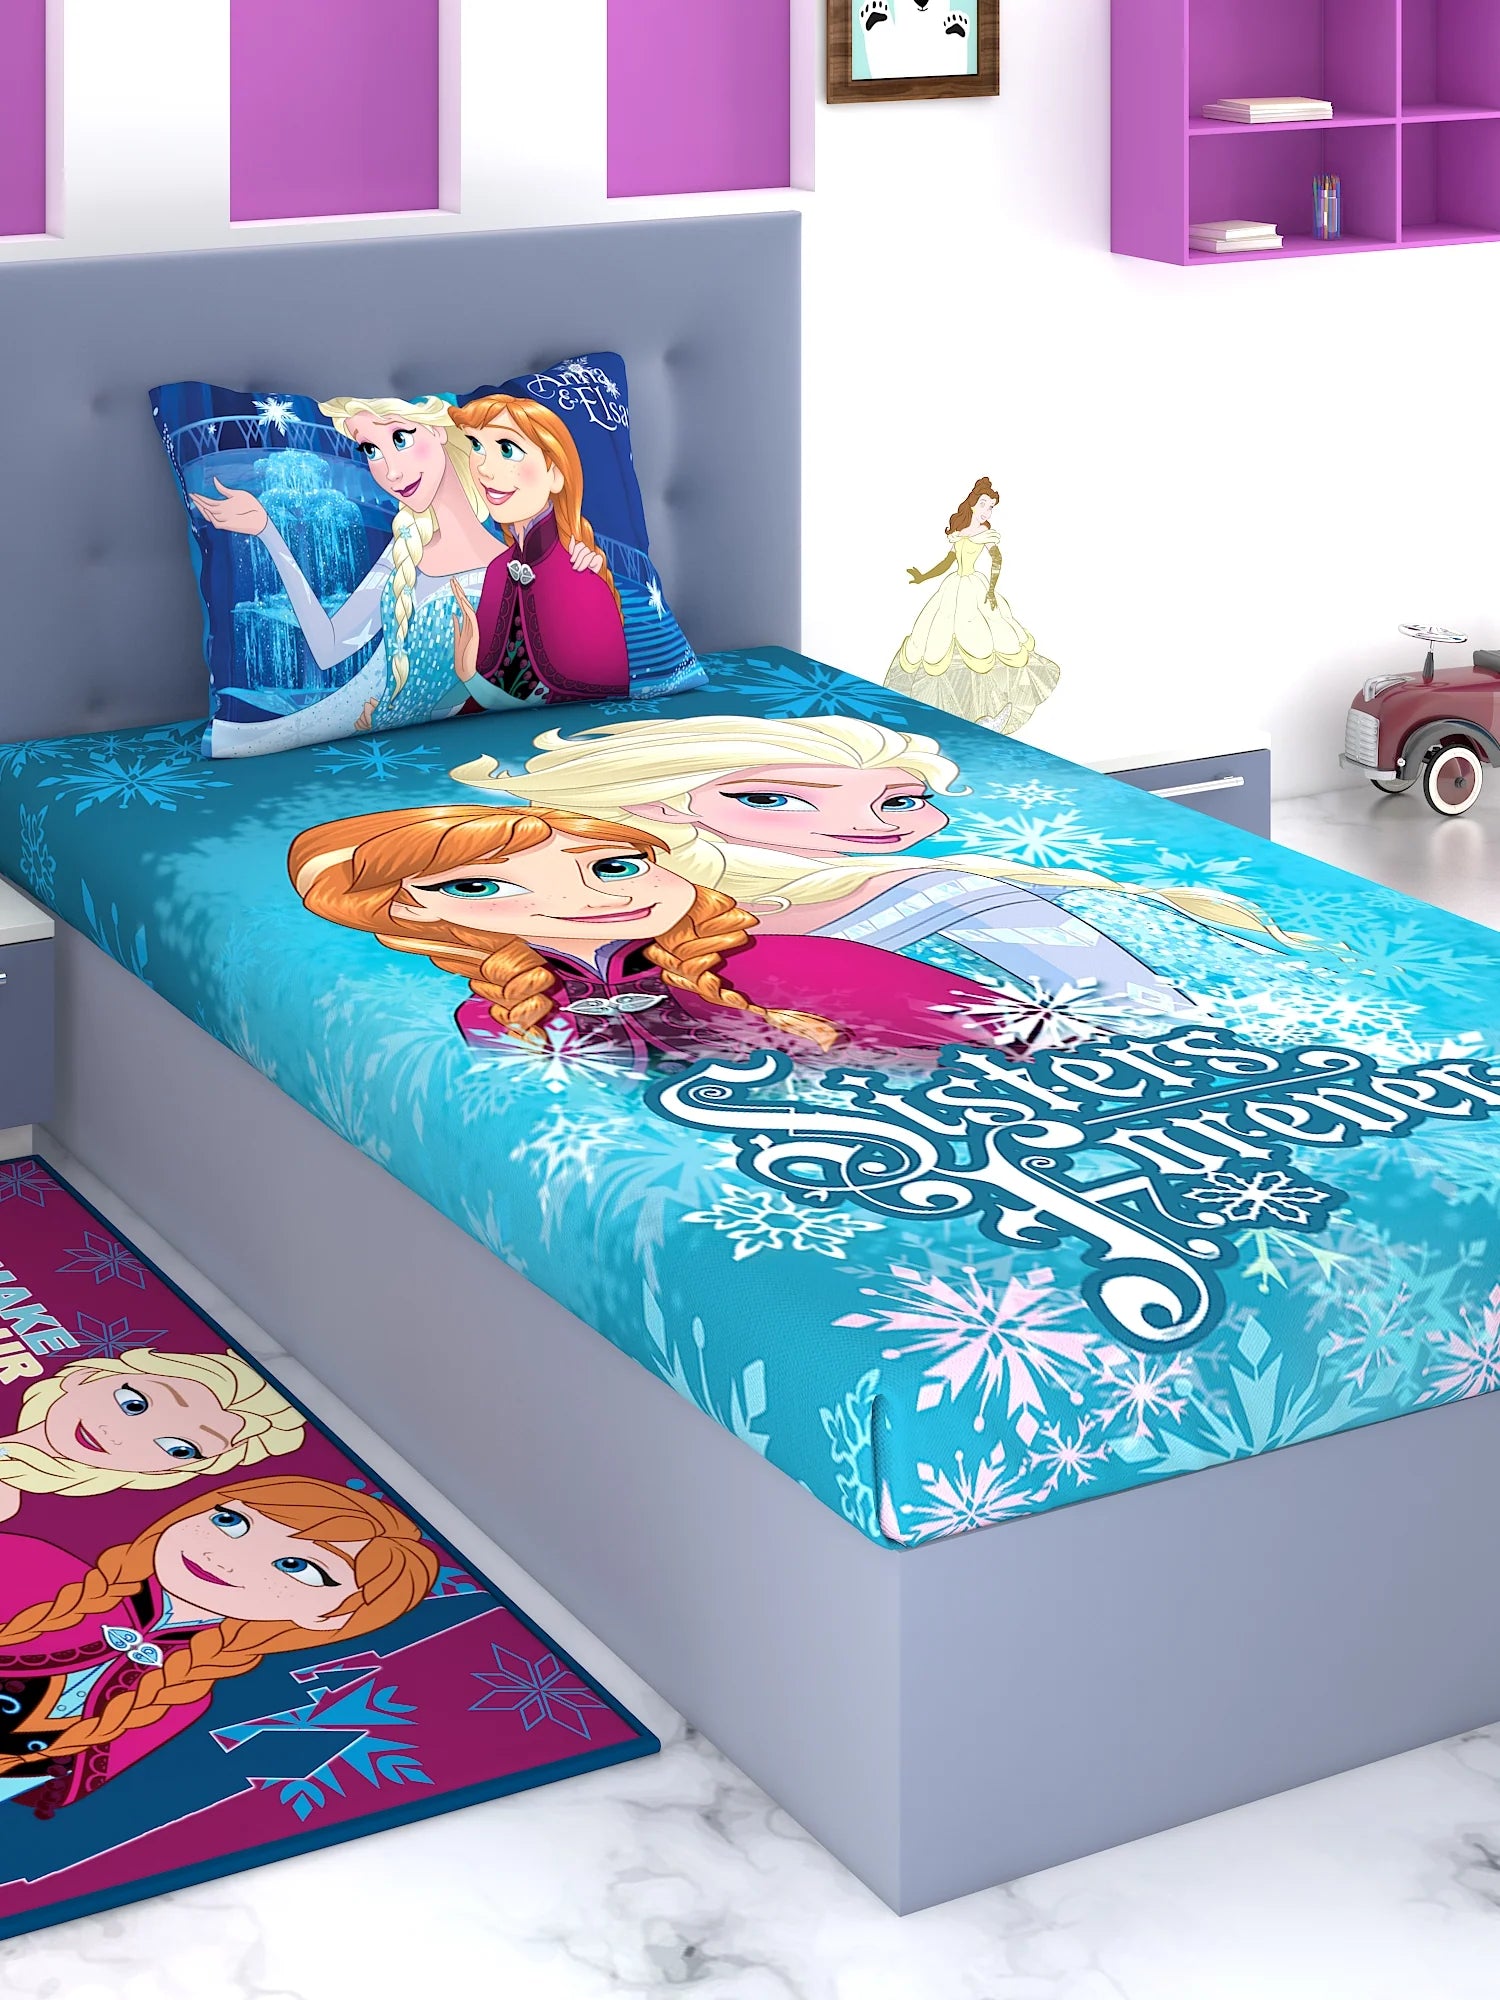 Disney's Frozen Sisters Forever Cotton Bedsheet Set: A Tribute to Timeless Bond